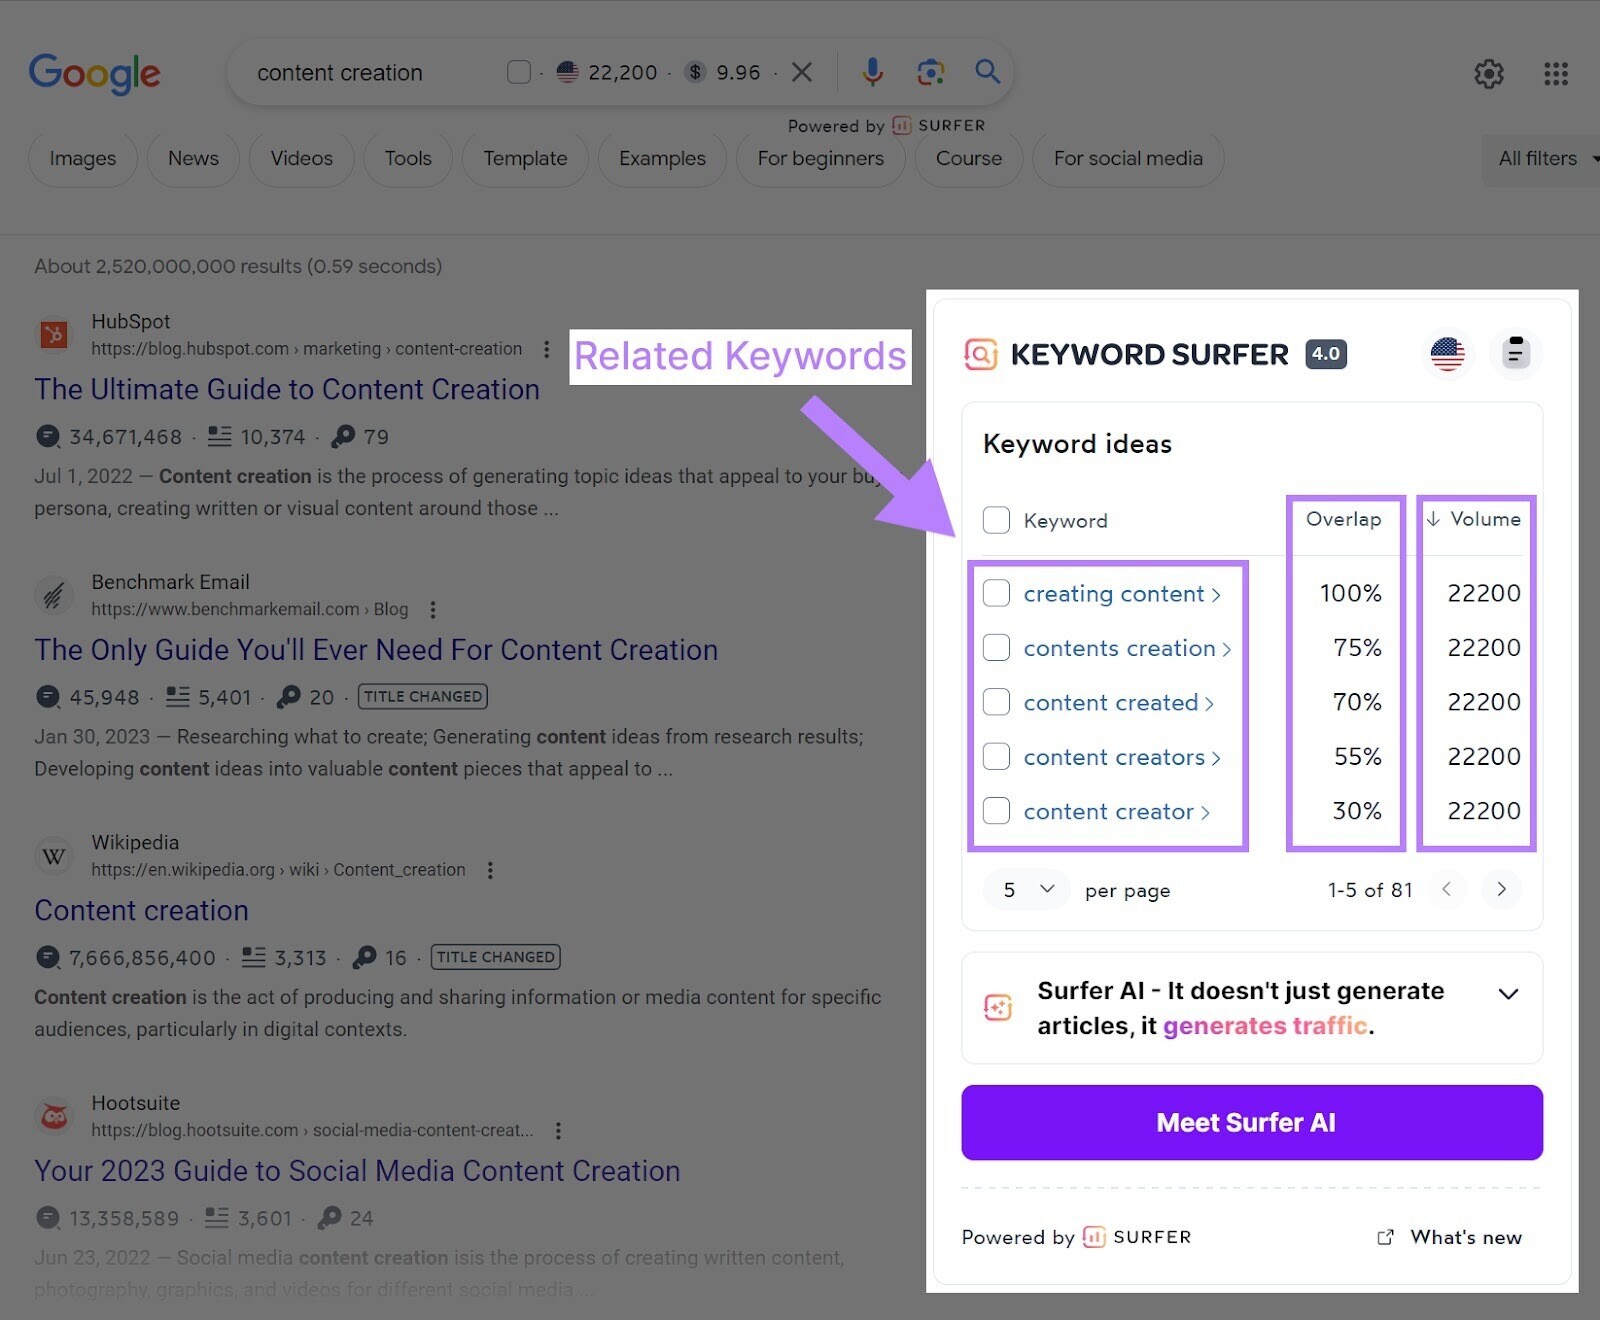 Keyword suggestions in a panel on the right side of the Google search engine results page